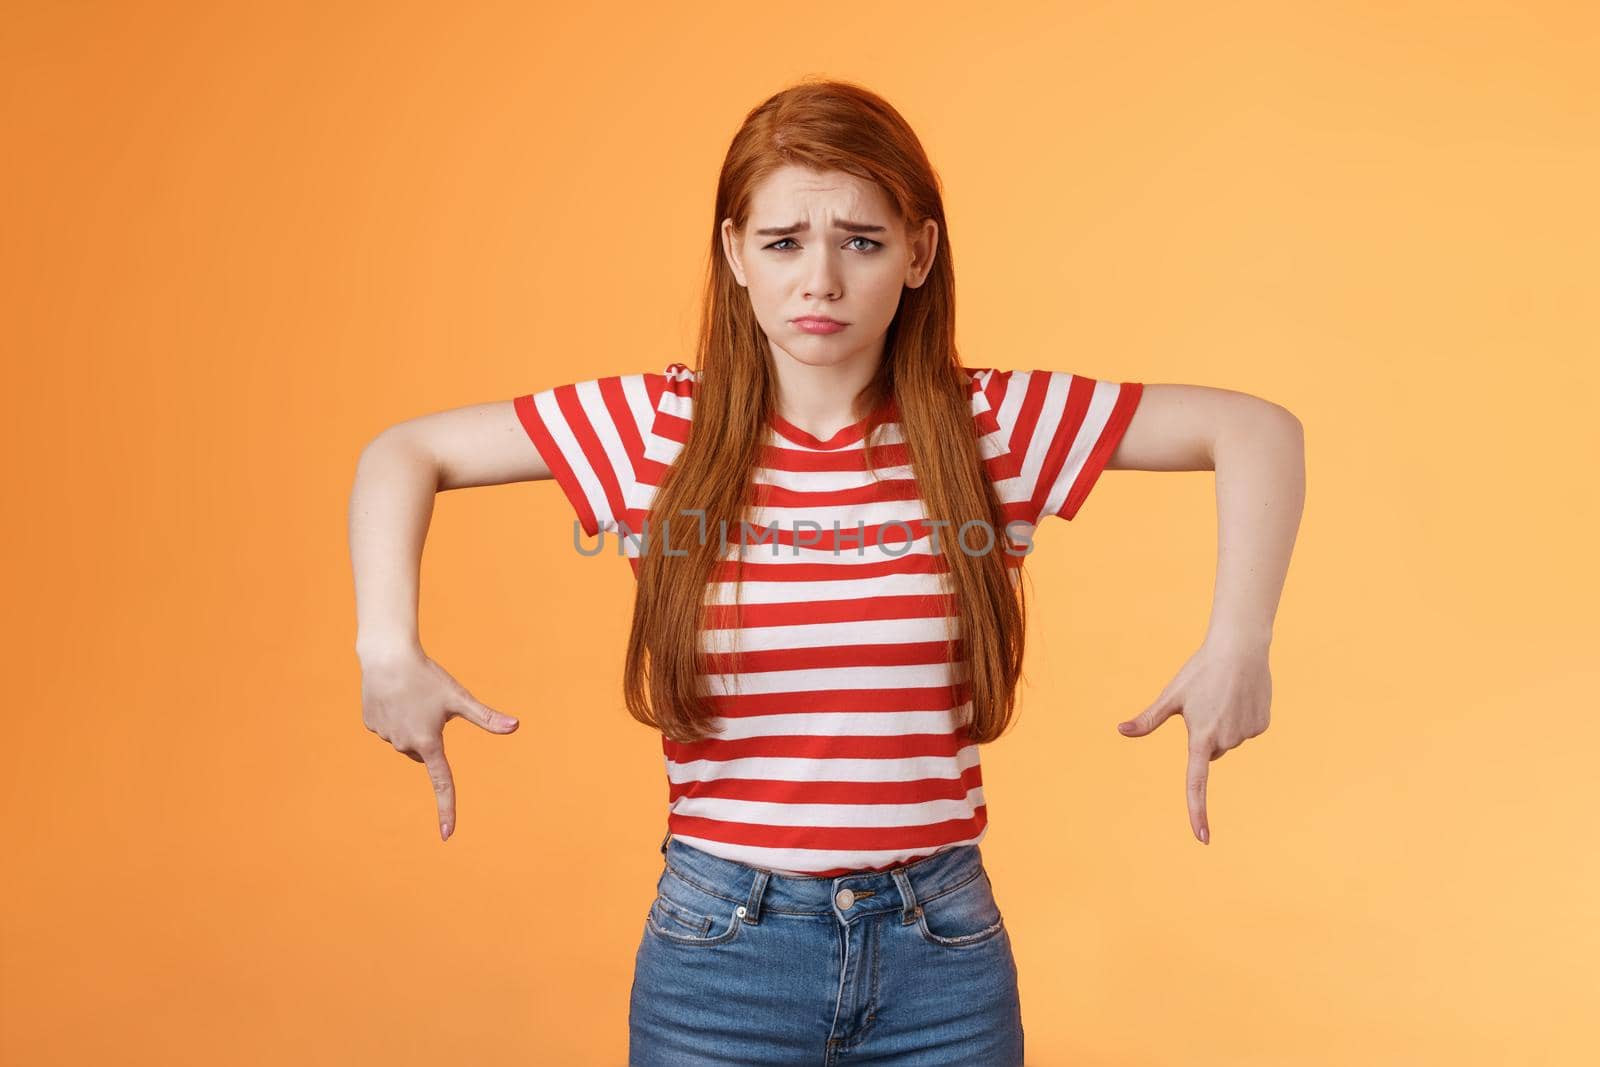 Cute timid hesitant ginger female taking tough decision feel pressured upset, frowning, pulling gloomy unhappy face, pointing down disappointed, uneasy taking decision, orange background.